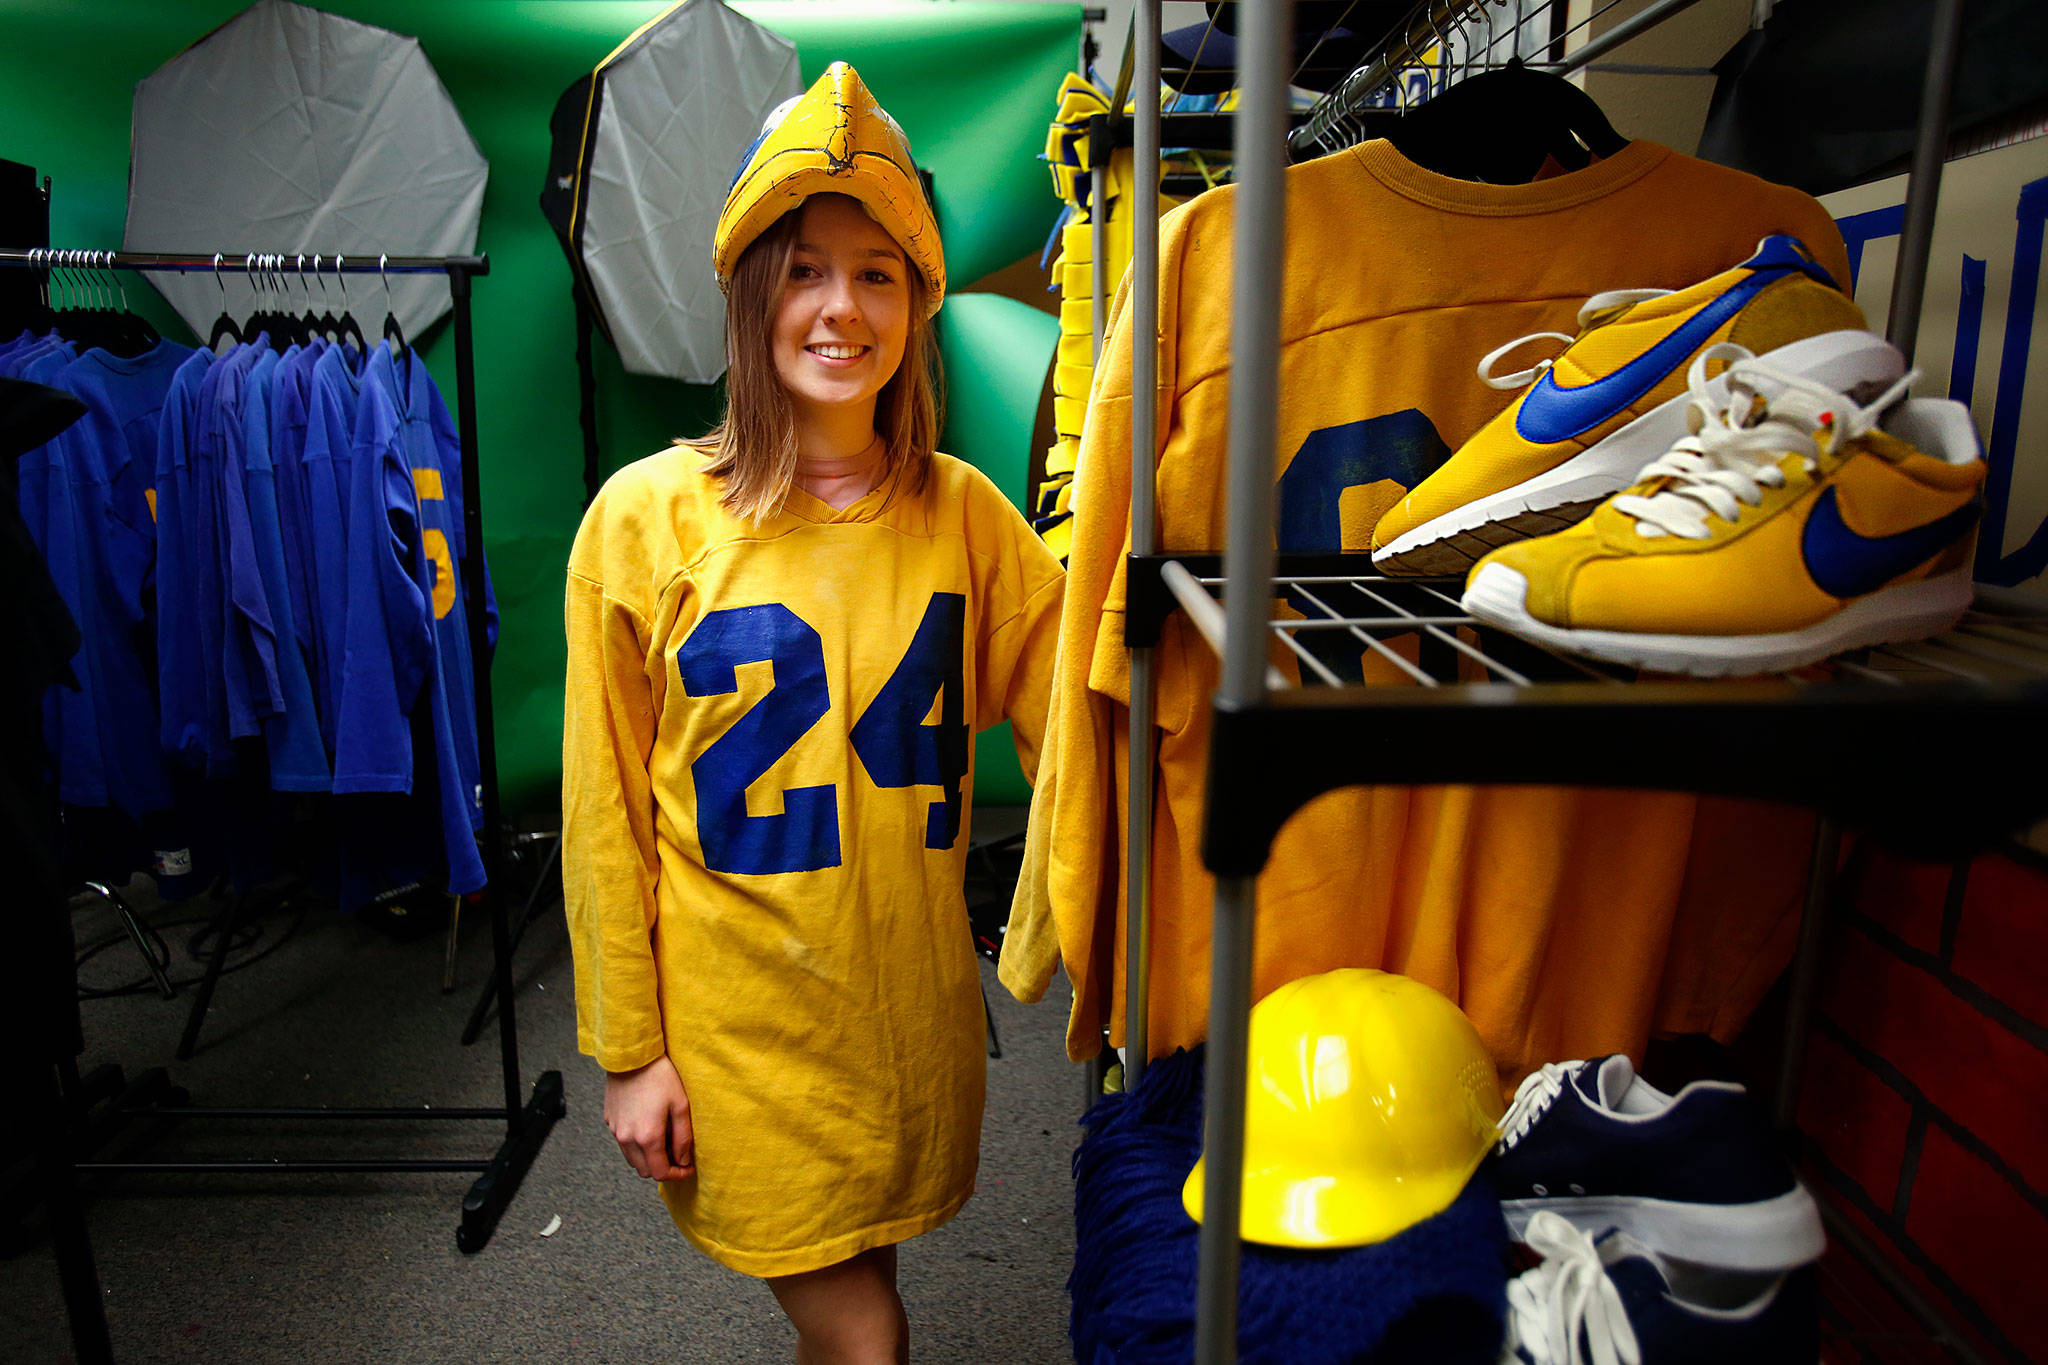 Everett High senior Danielle Scanes is starting a thrift shop at school called The Vintage Seagull. The aim is to sell donated, recycled blue and gold spirit gear—nothing priced over $5—to give all kids a chance to show their school colors. (Dan Bates / The Herald)